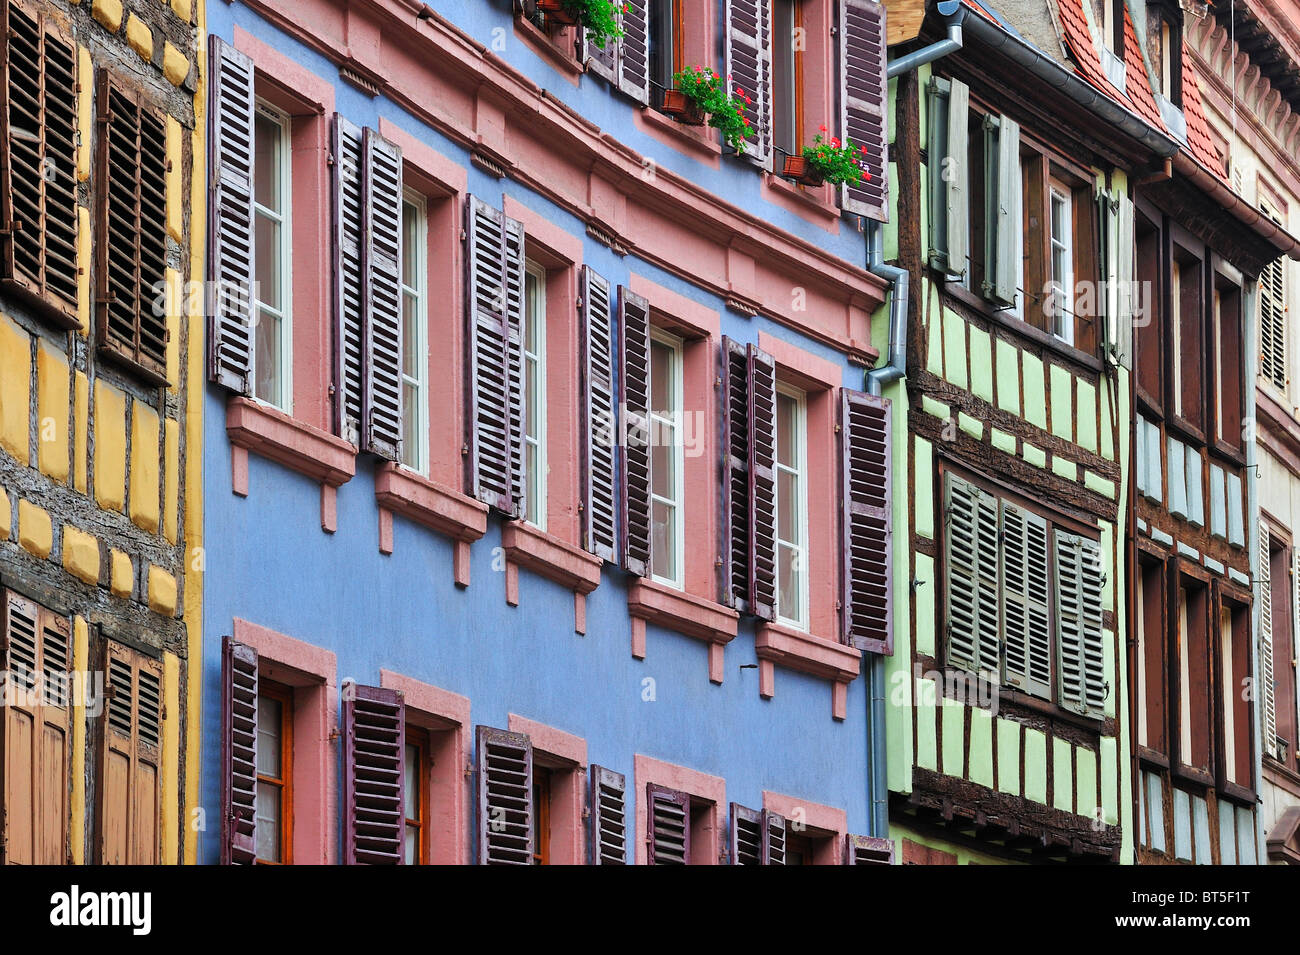 Colorful façades of timber framed houses at Colmar, Alsace, France Stock Photo